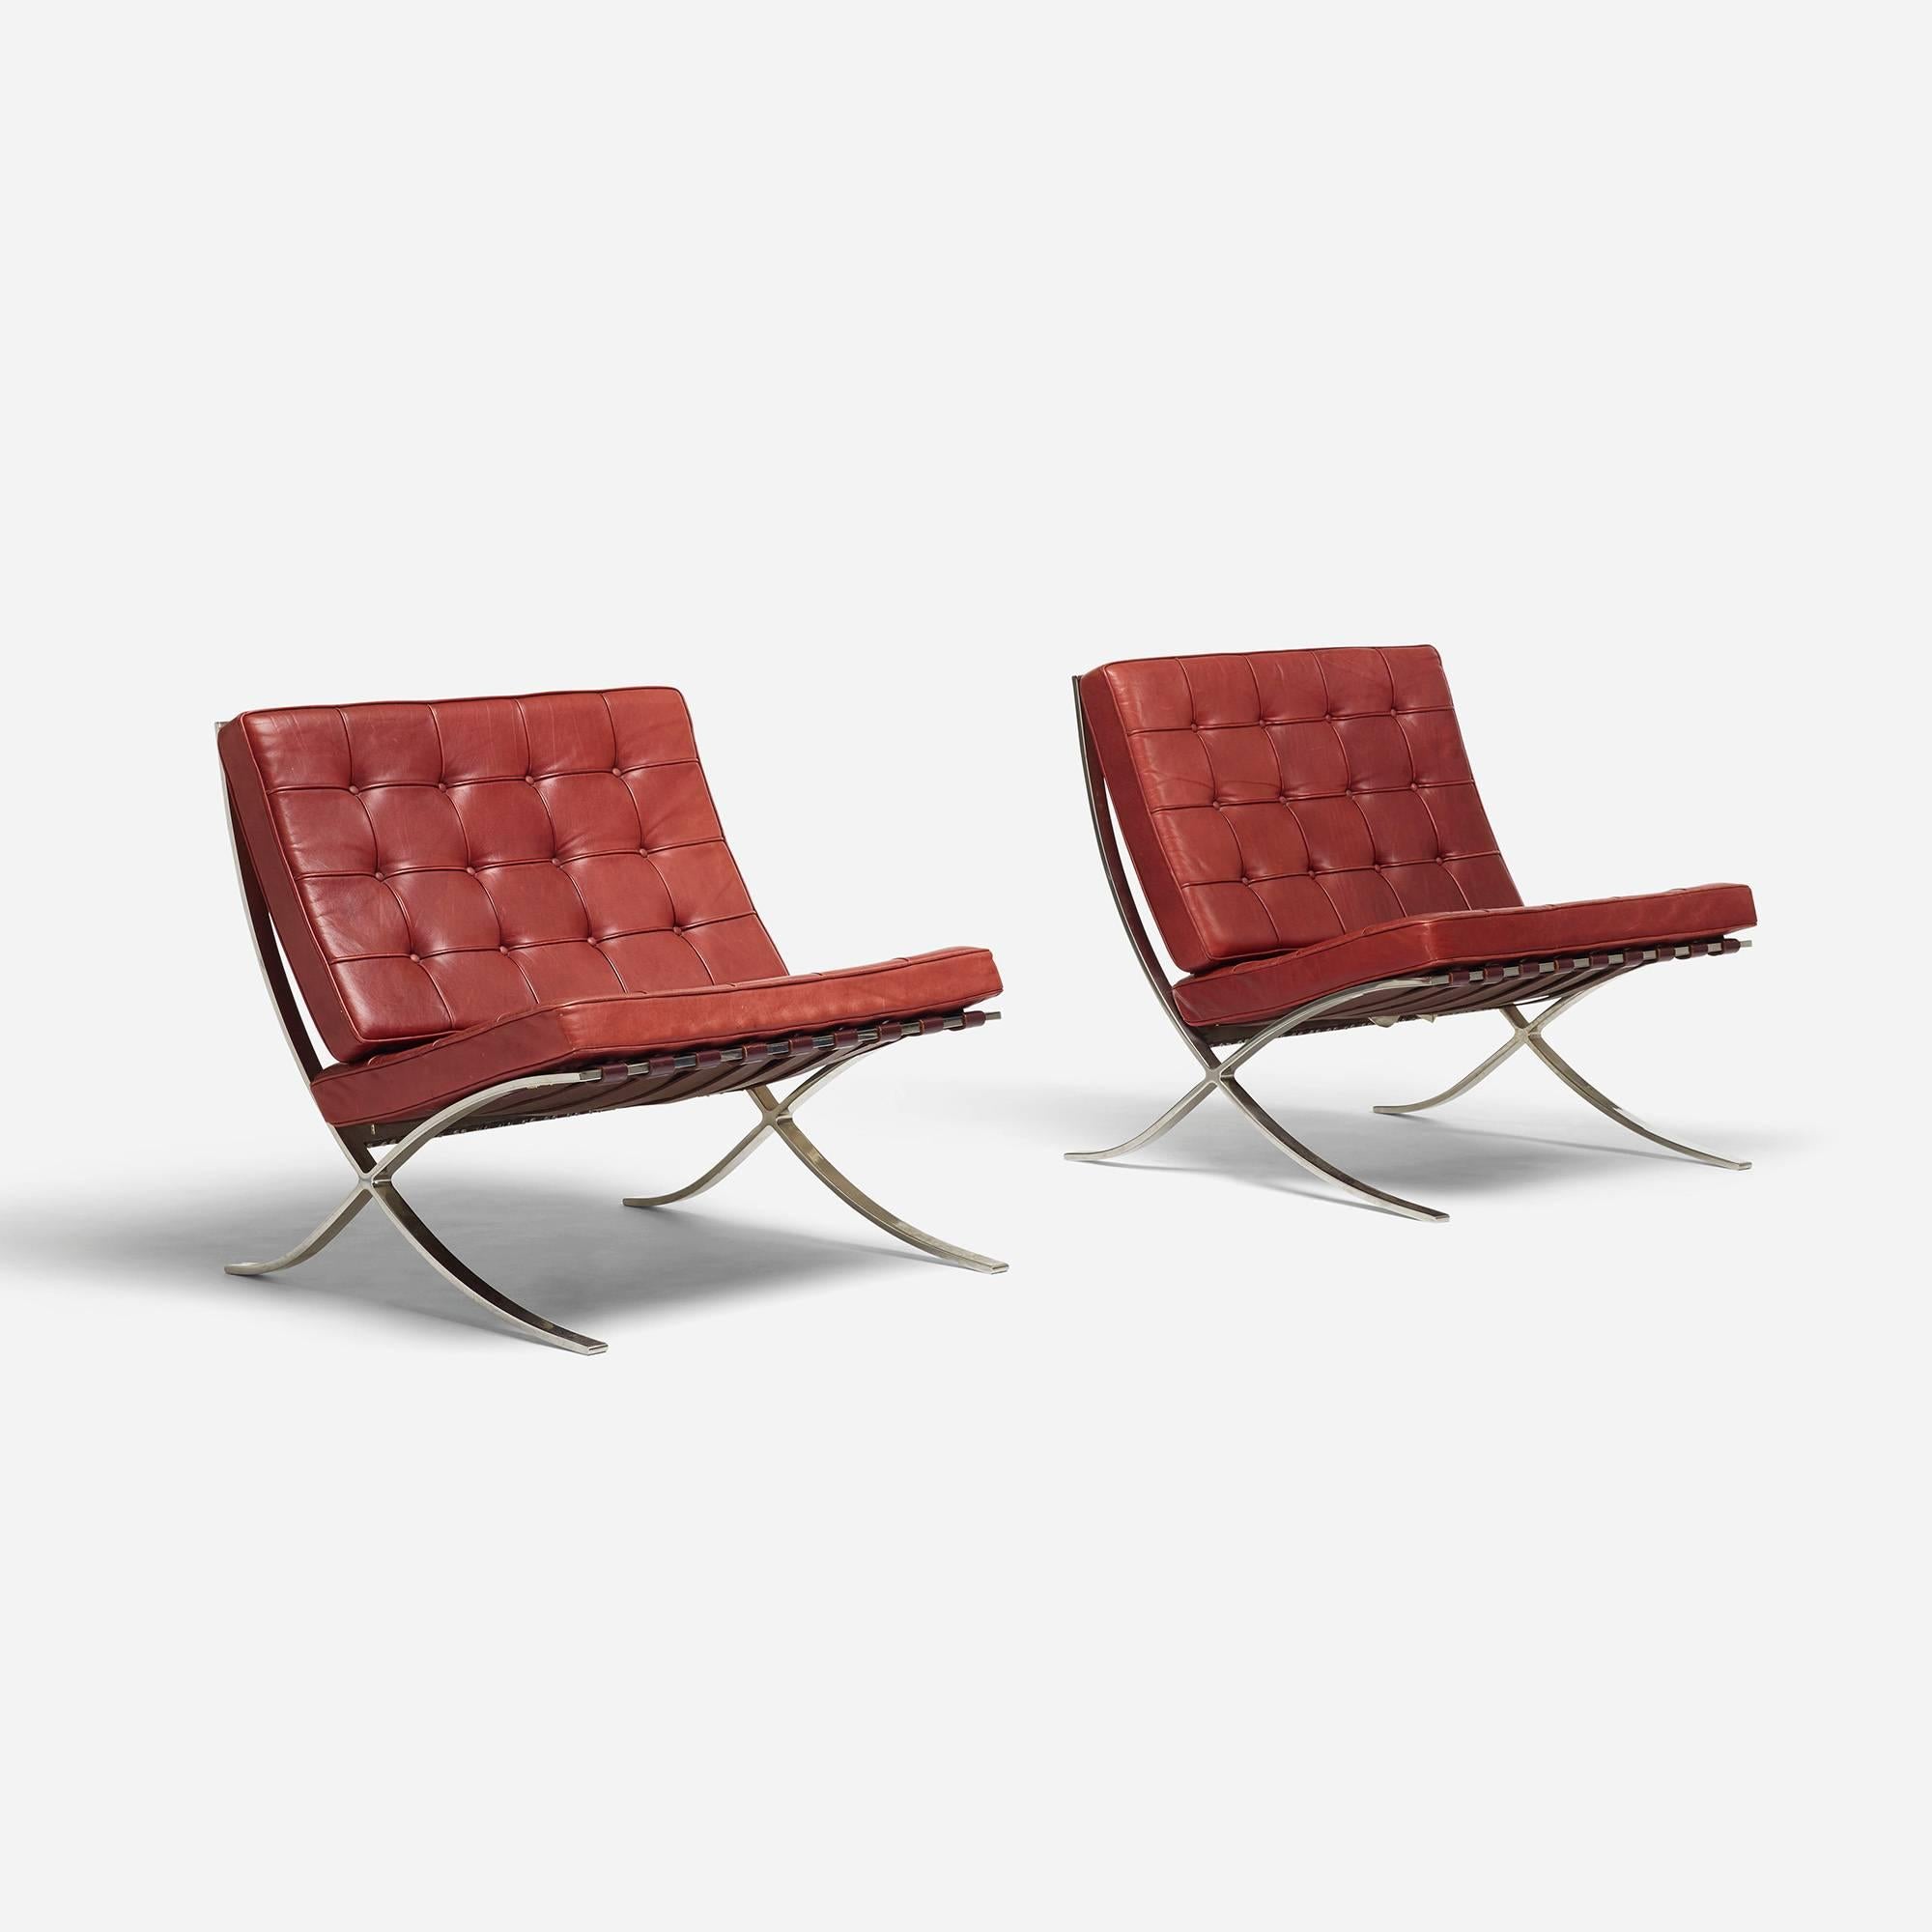 These chairs come from The Brick and Glass House, a residence in Chicago designed by architects Krueck & Sexton. Signed with paper manufacturer's label to underside of each: [Knoll International Inc].